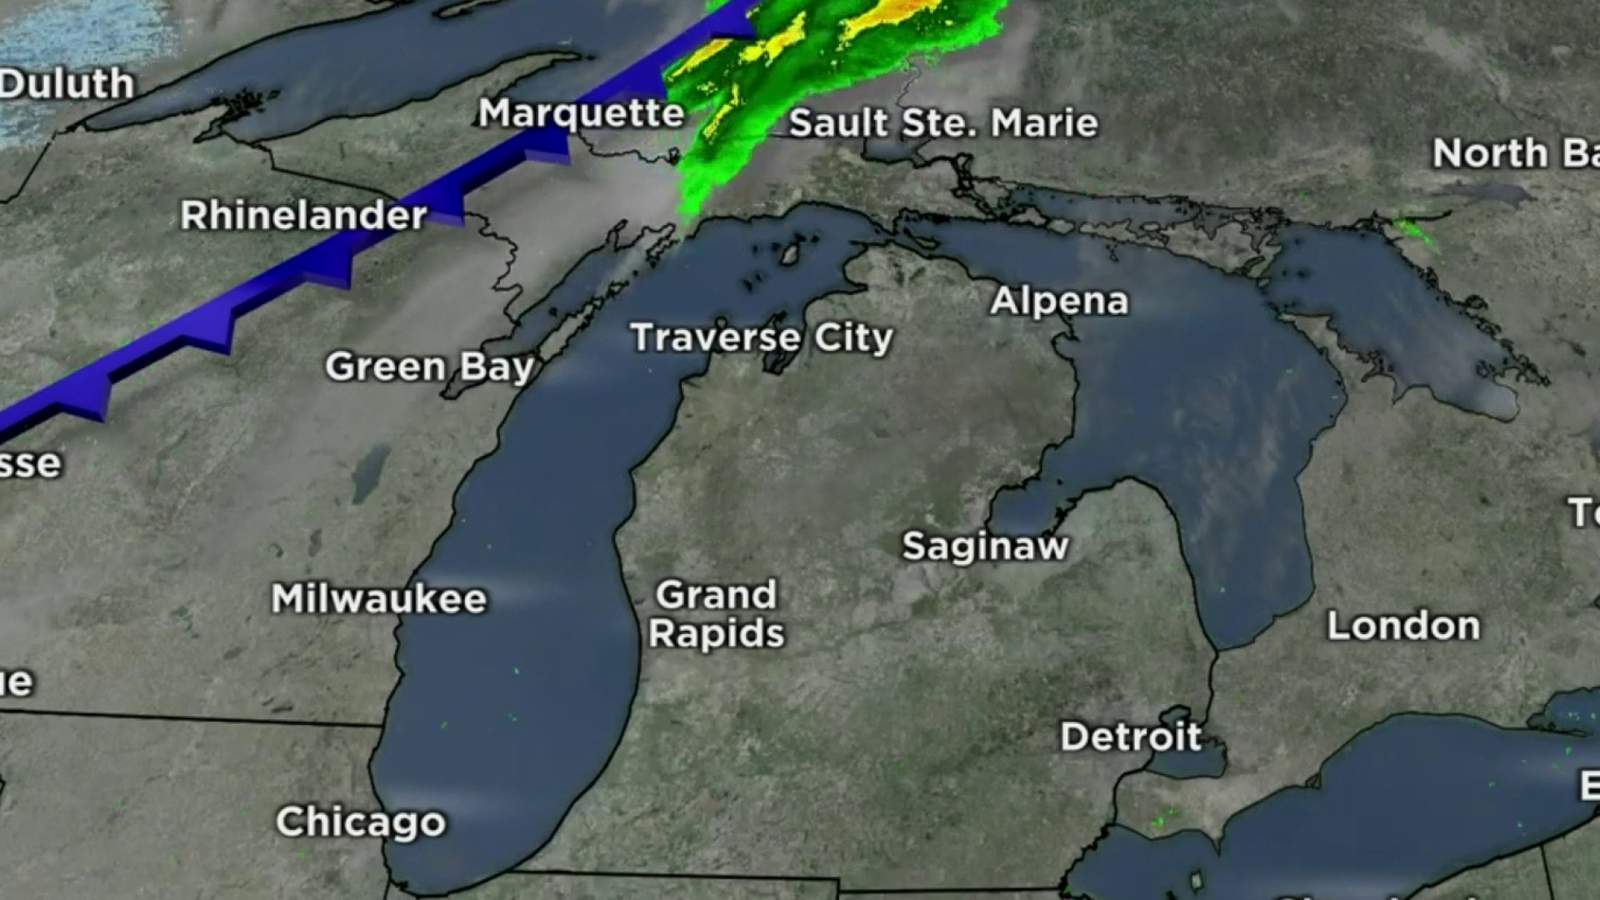 Metro Detroit weather: Windy with 70 degrees possible today